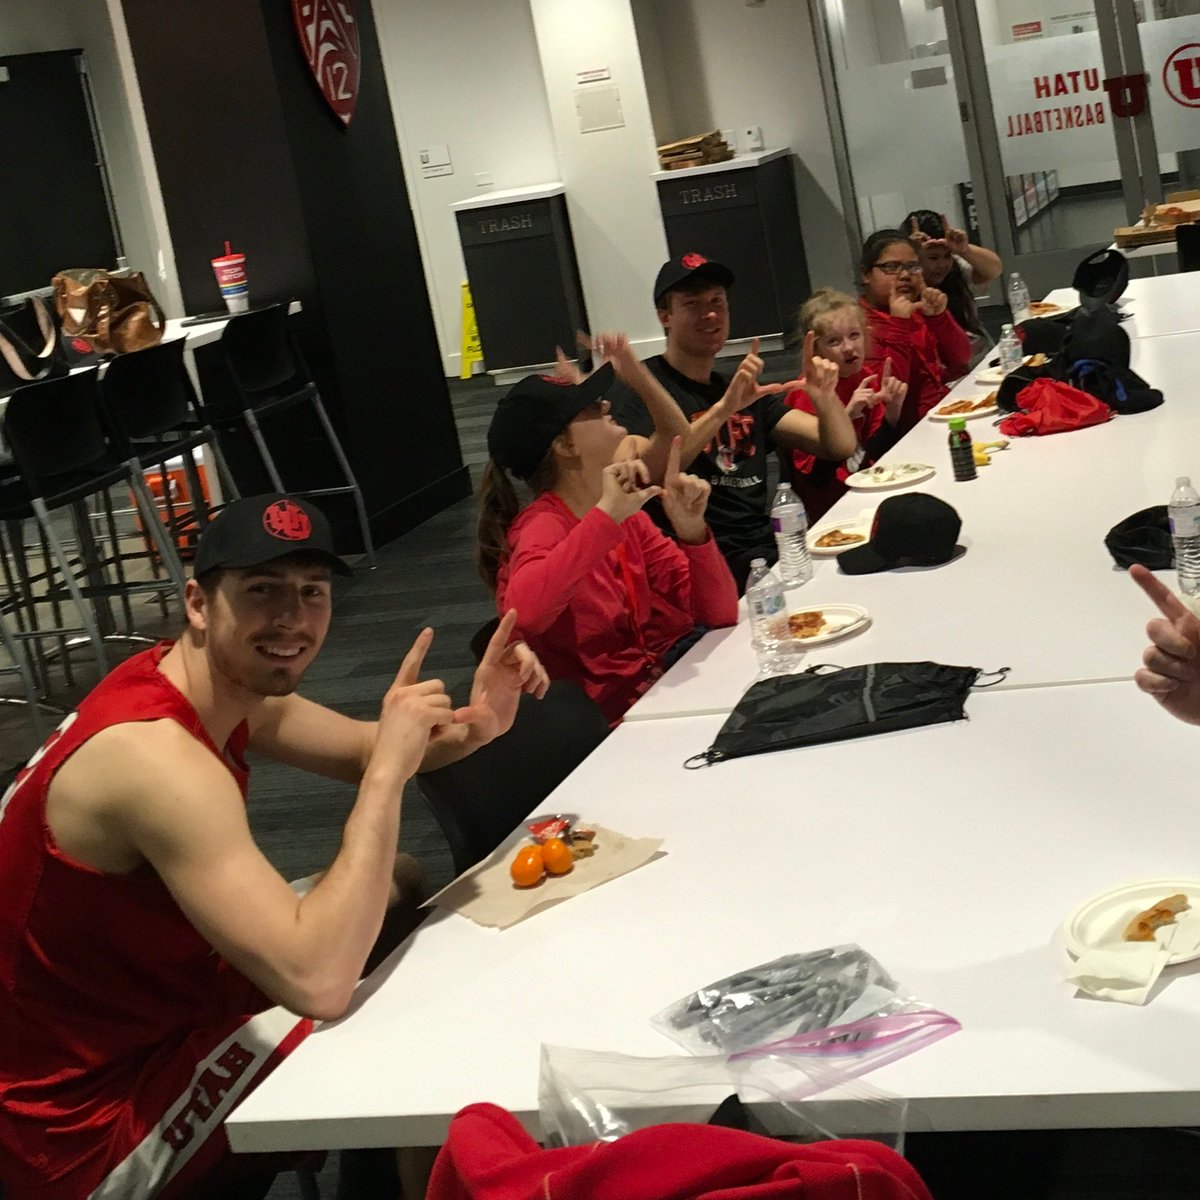 with my students.  @battin_riley and Eli Ballstaedt who sat and ate lunch with my class.  @LKrystkowiak who takes the time to greet and make connections with my kids. The whole 2020 Basketball team who took valuable time from practice to see my class. There have been others like